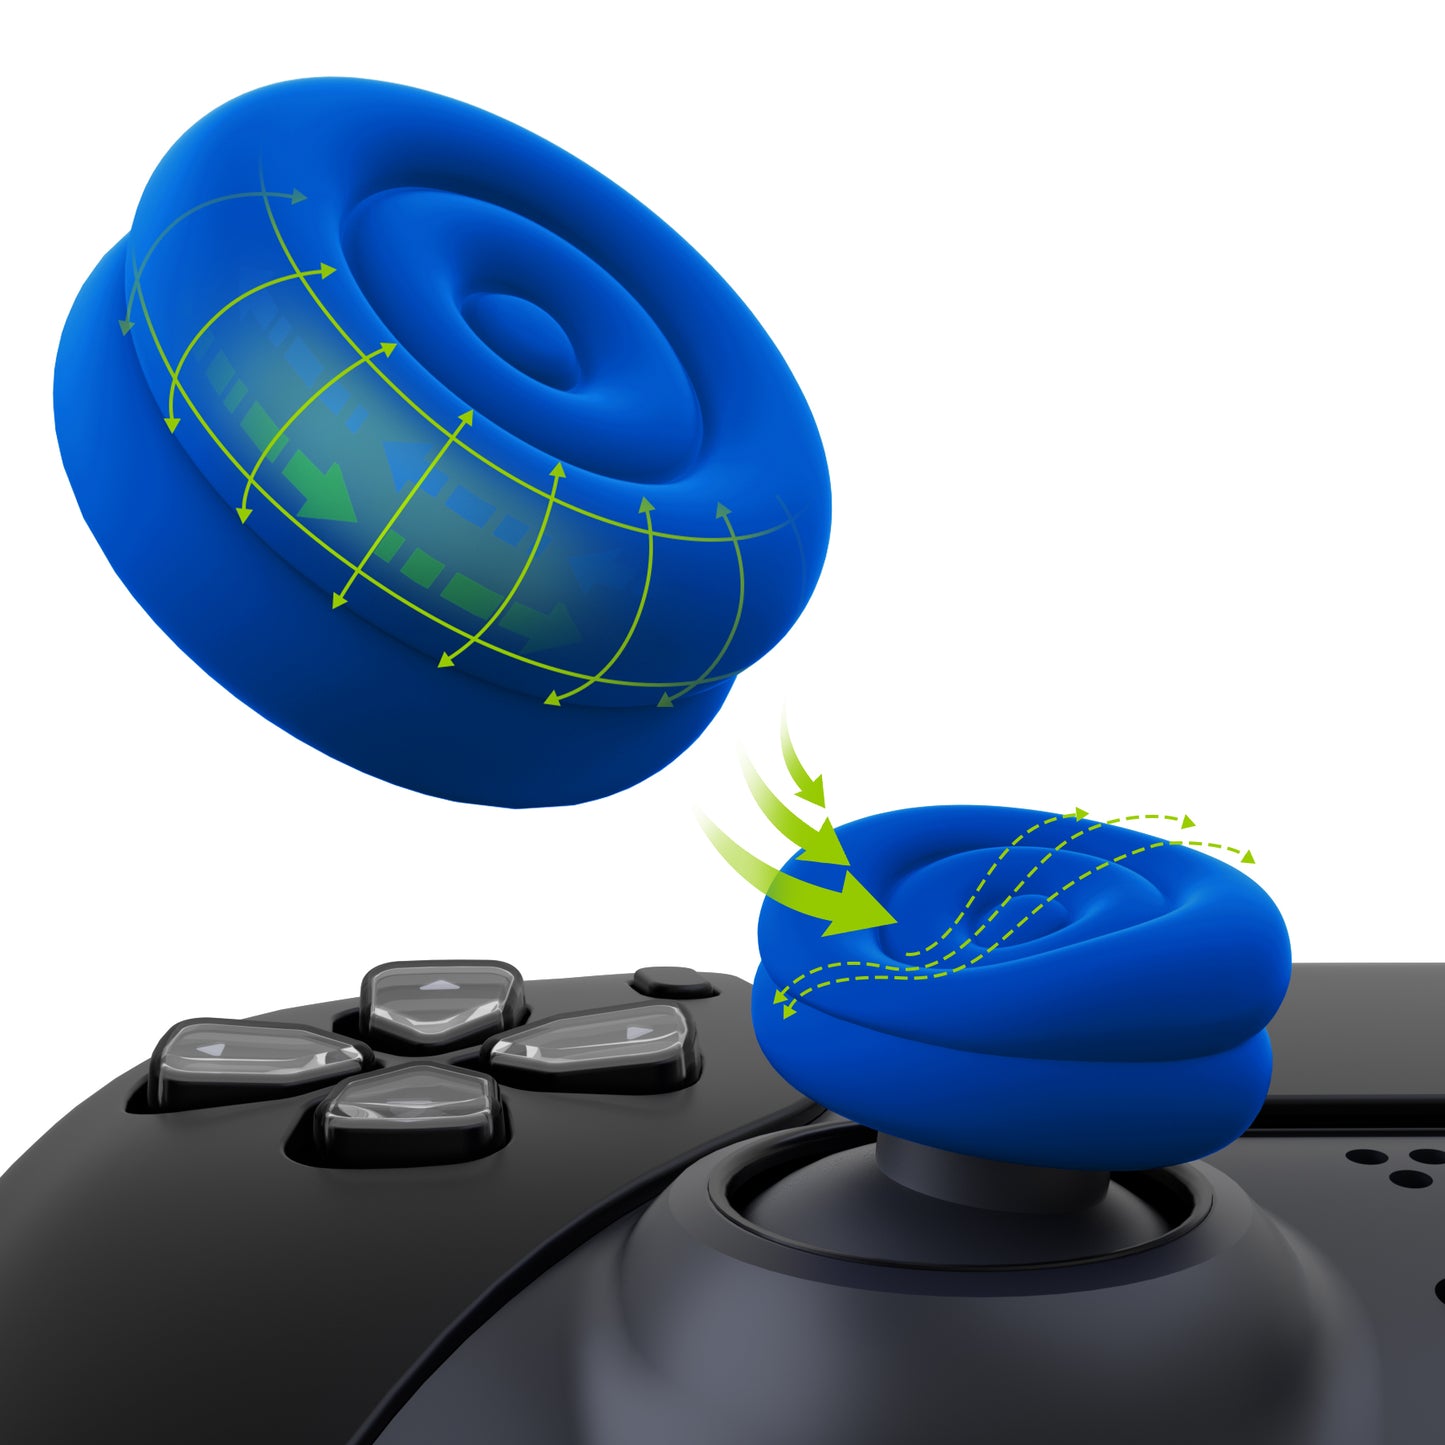 PS5 Joystick Grips - What PS5 Joystick Grips Are Available